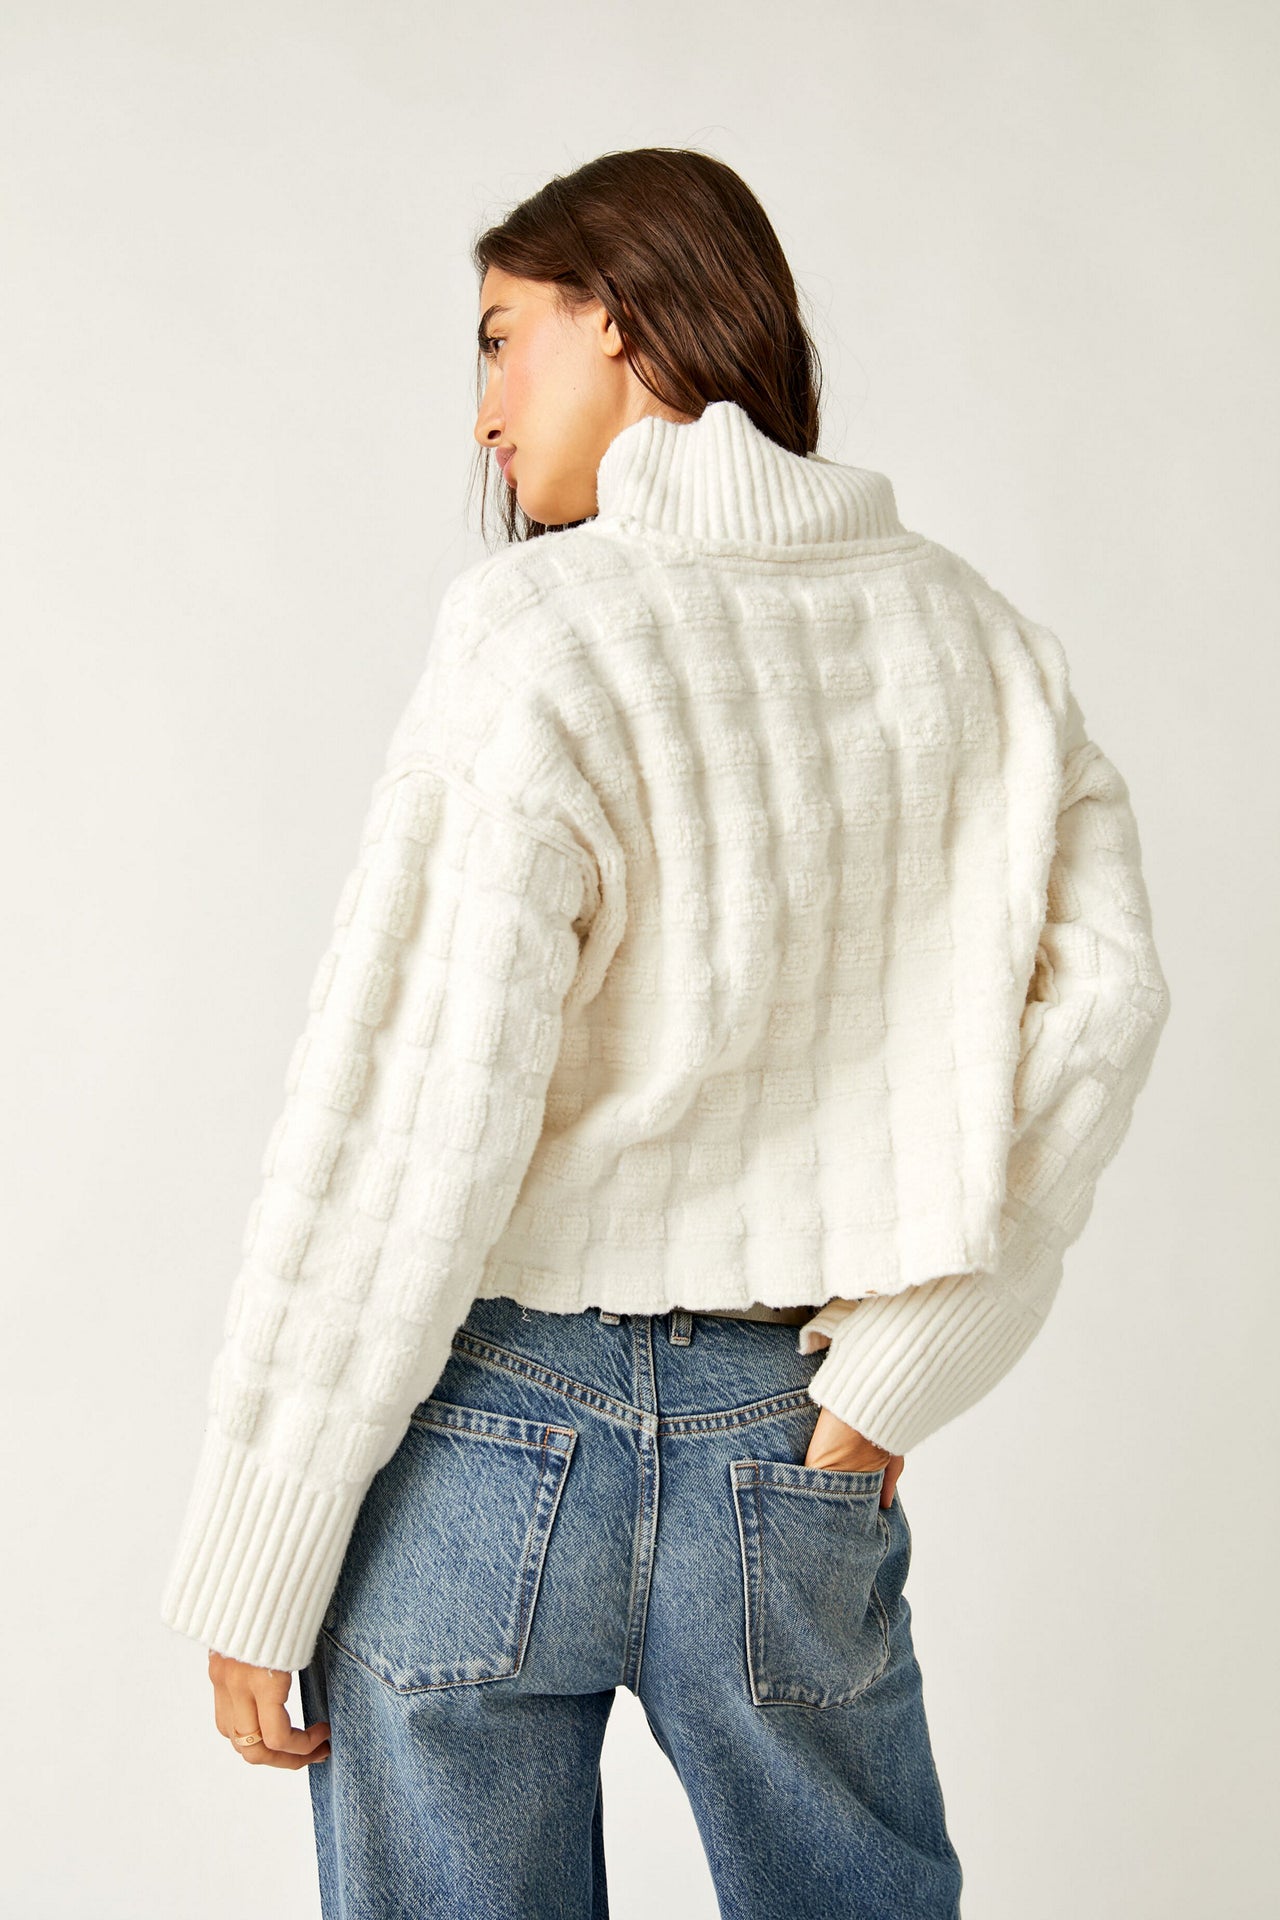 Care FP Soul Searcher Moc Ivory, Sweater by Free People | LIT Boutique